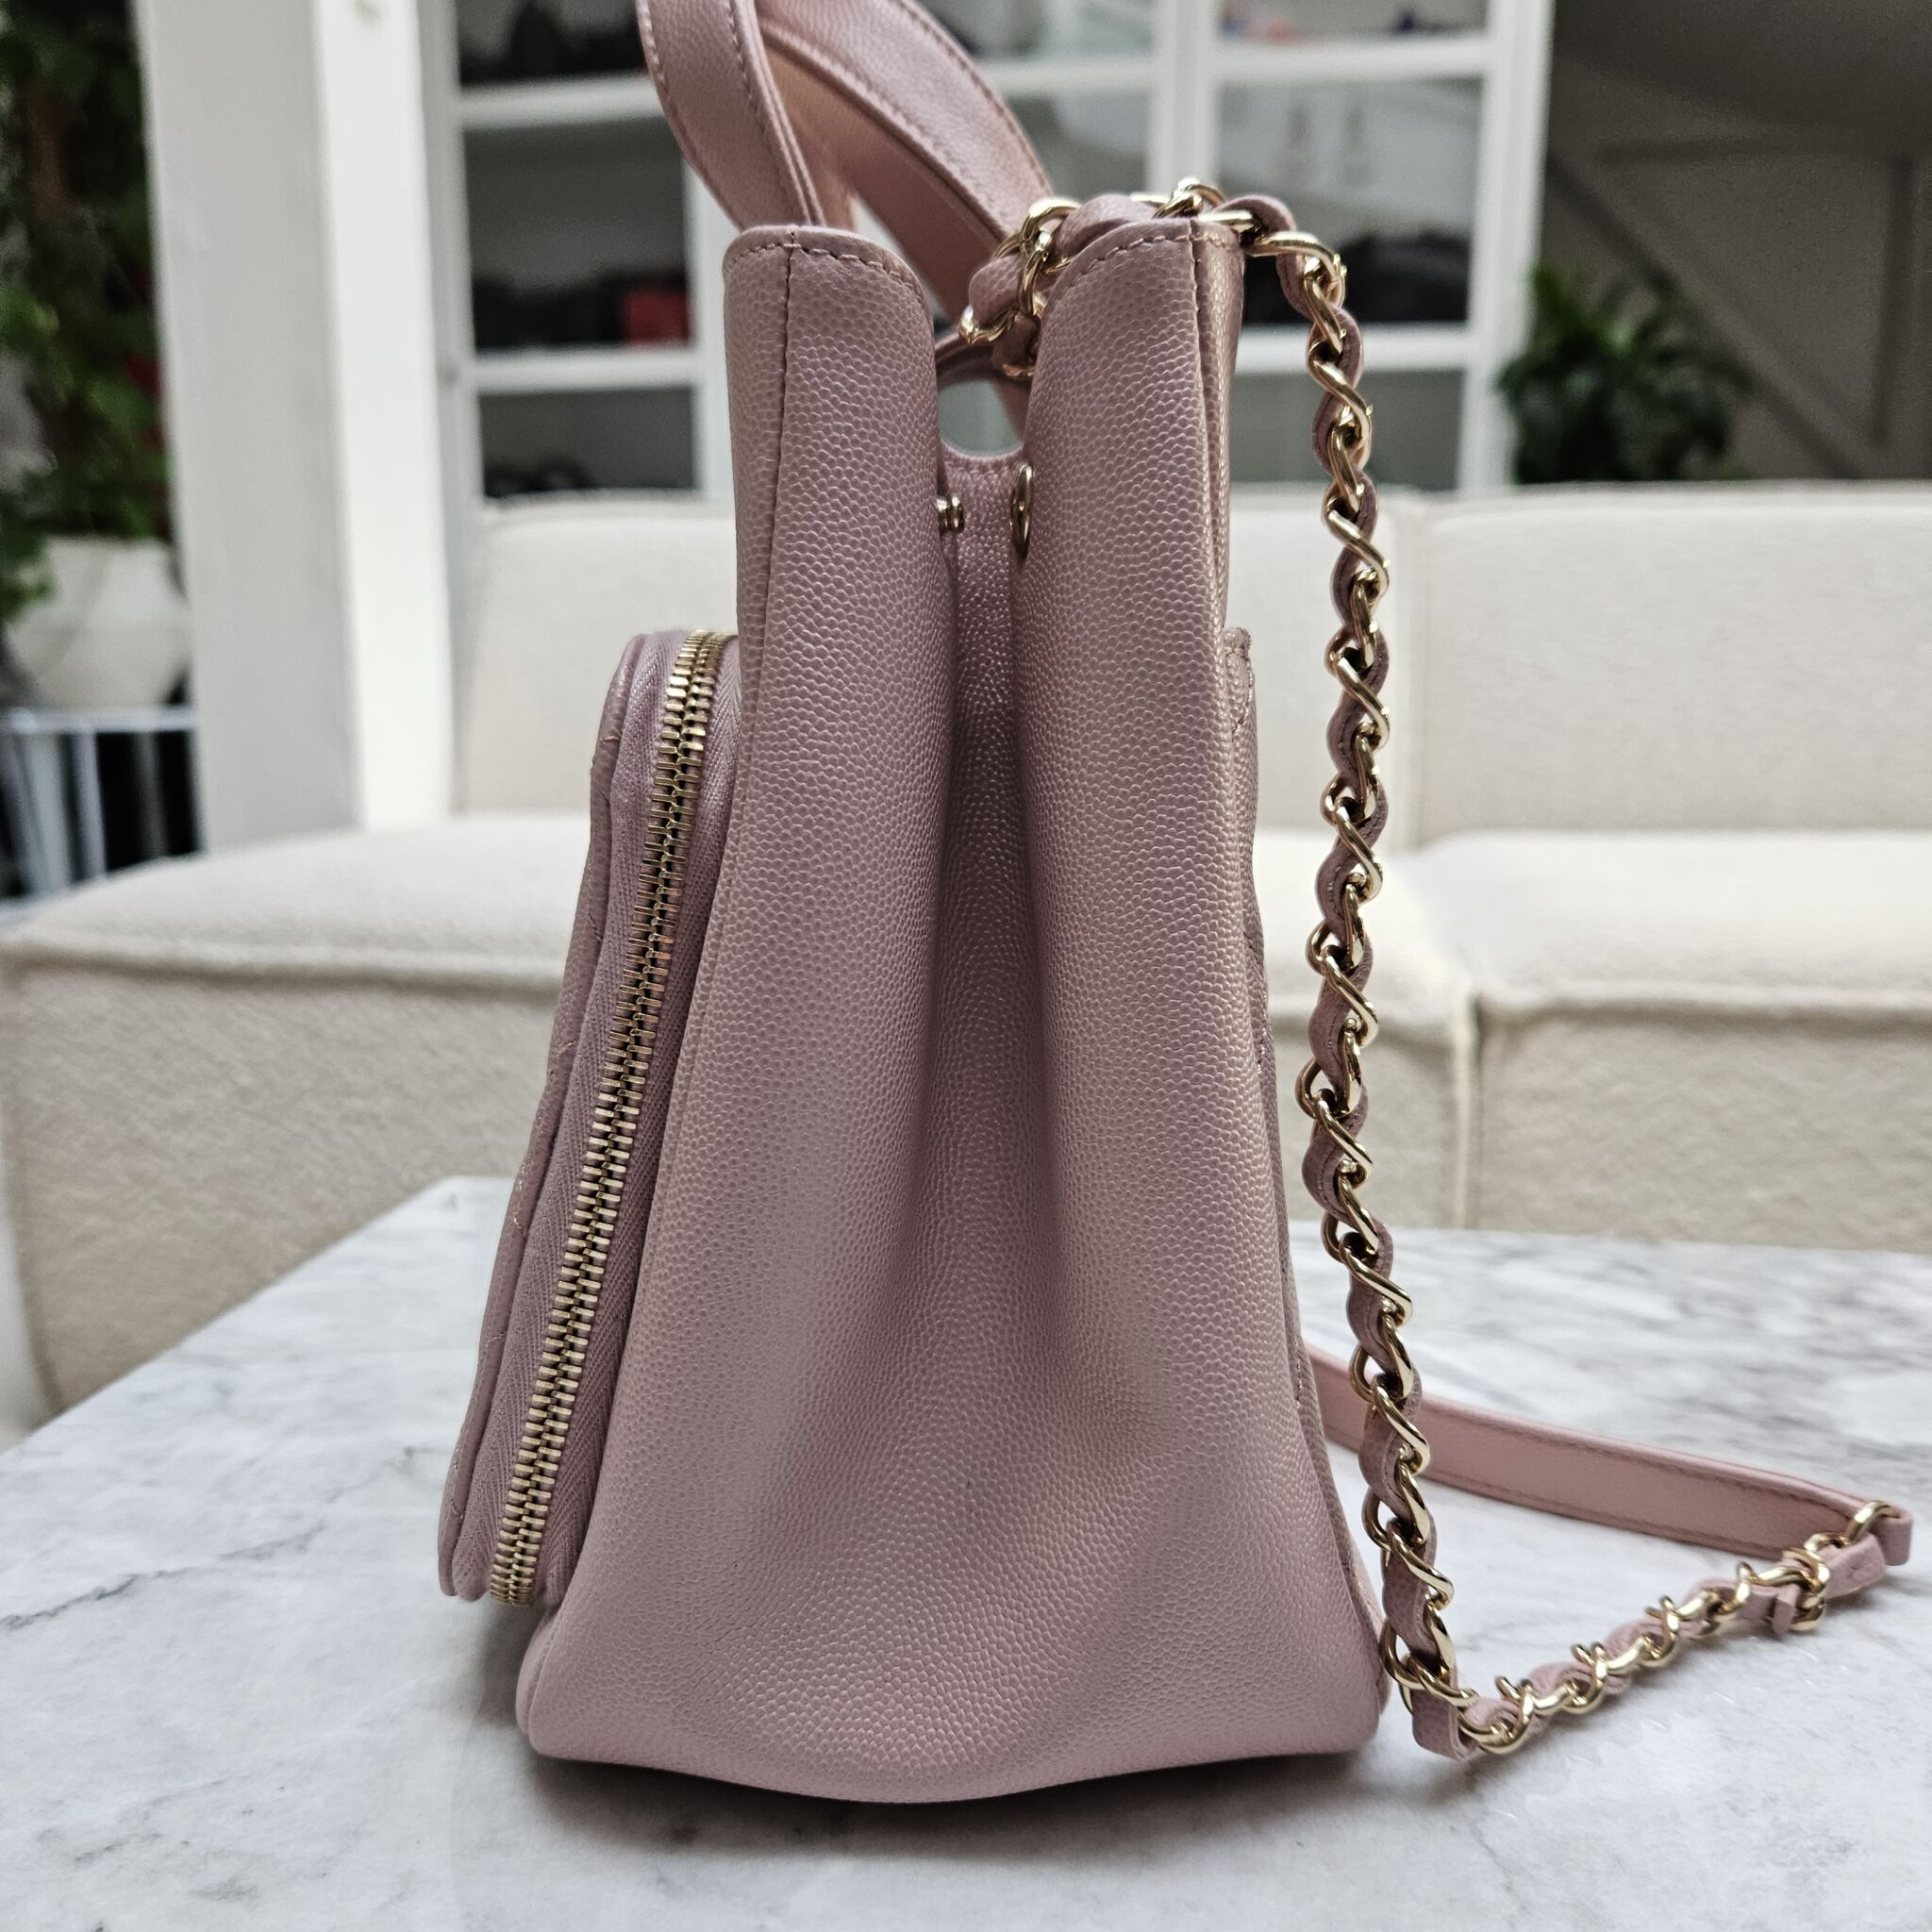 Chanel Small Business Affinity Shopper, Caviar, Light Pink LGHW